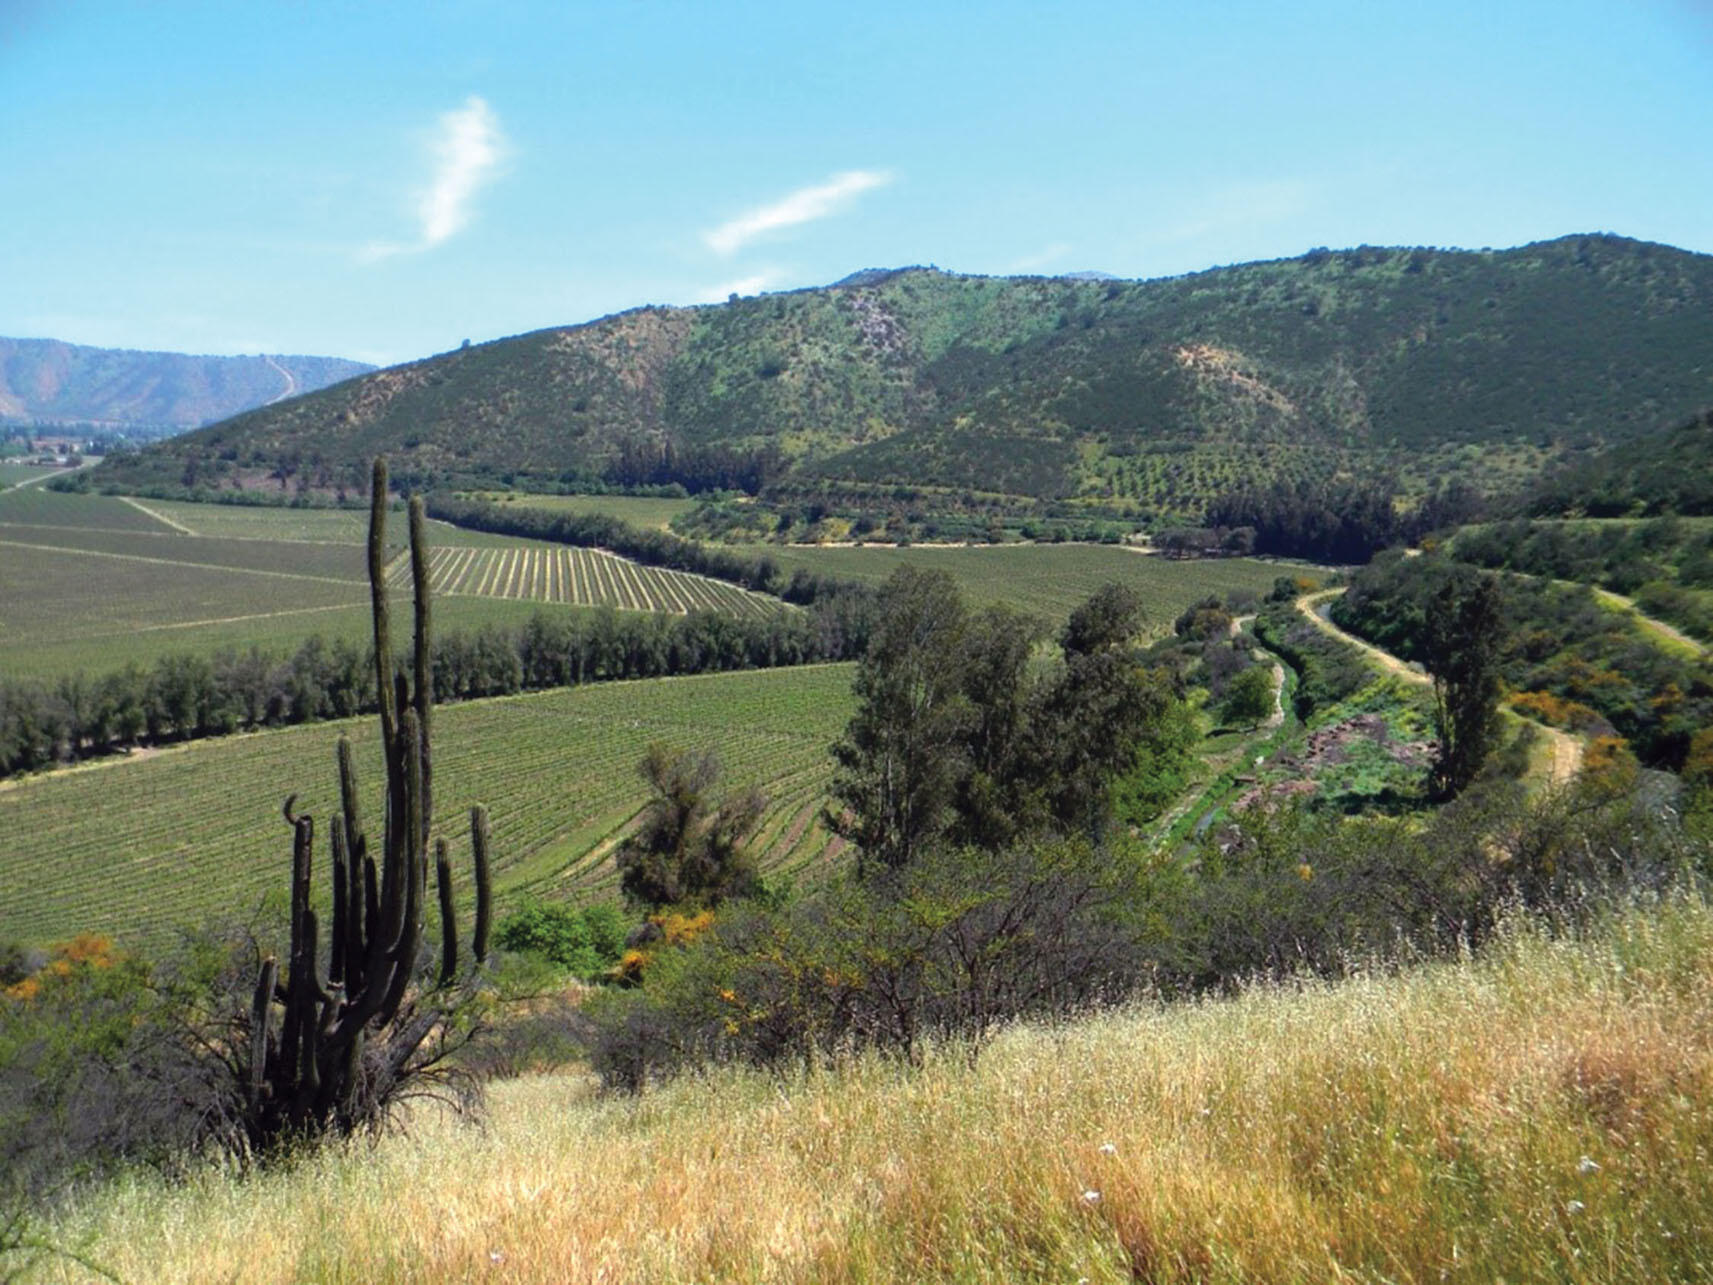 A hillside at Odfjell Vineyards in Maipo Valley, Chile, which adjoins 150 hectares of native shrublands  and forest currently under a restoration program focusing on degraded slopes. (Photo courtesy of Adina Merenlender.)